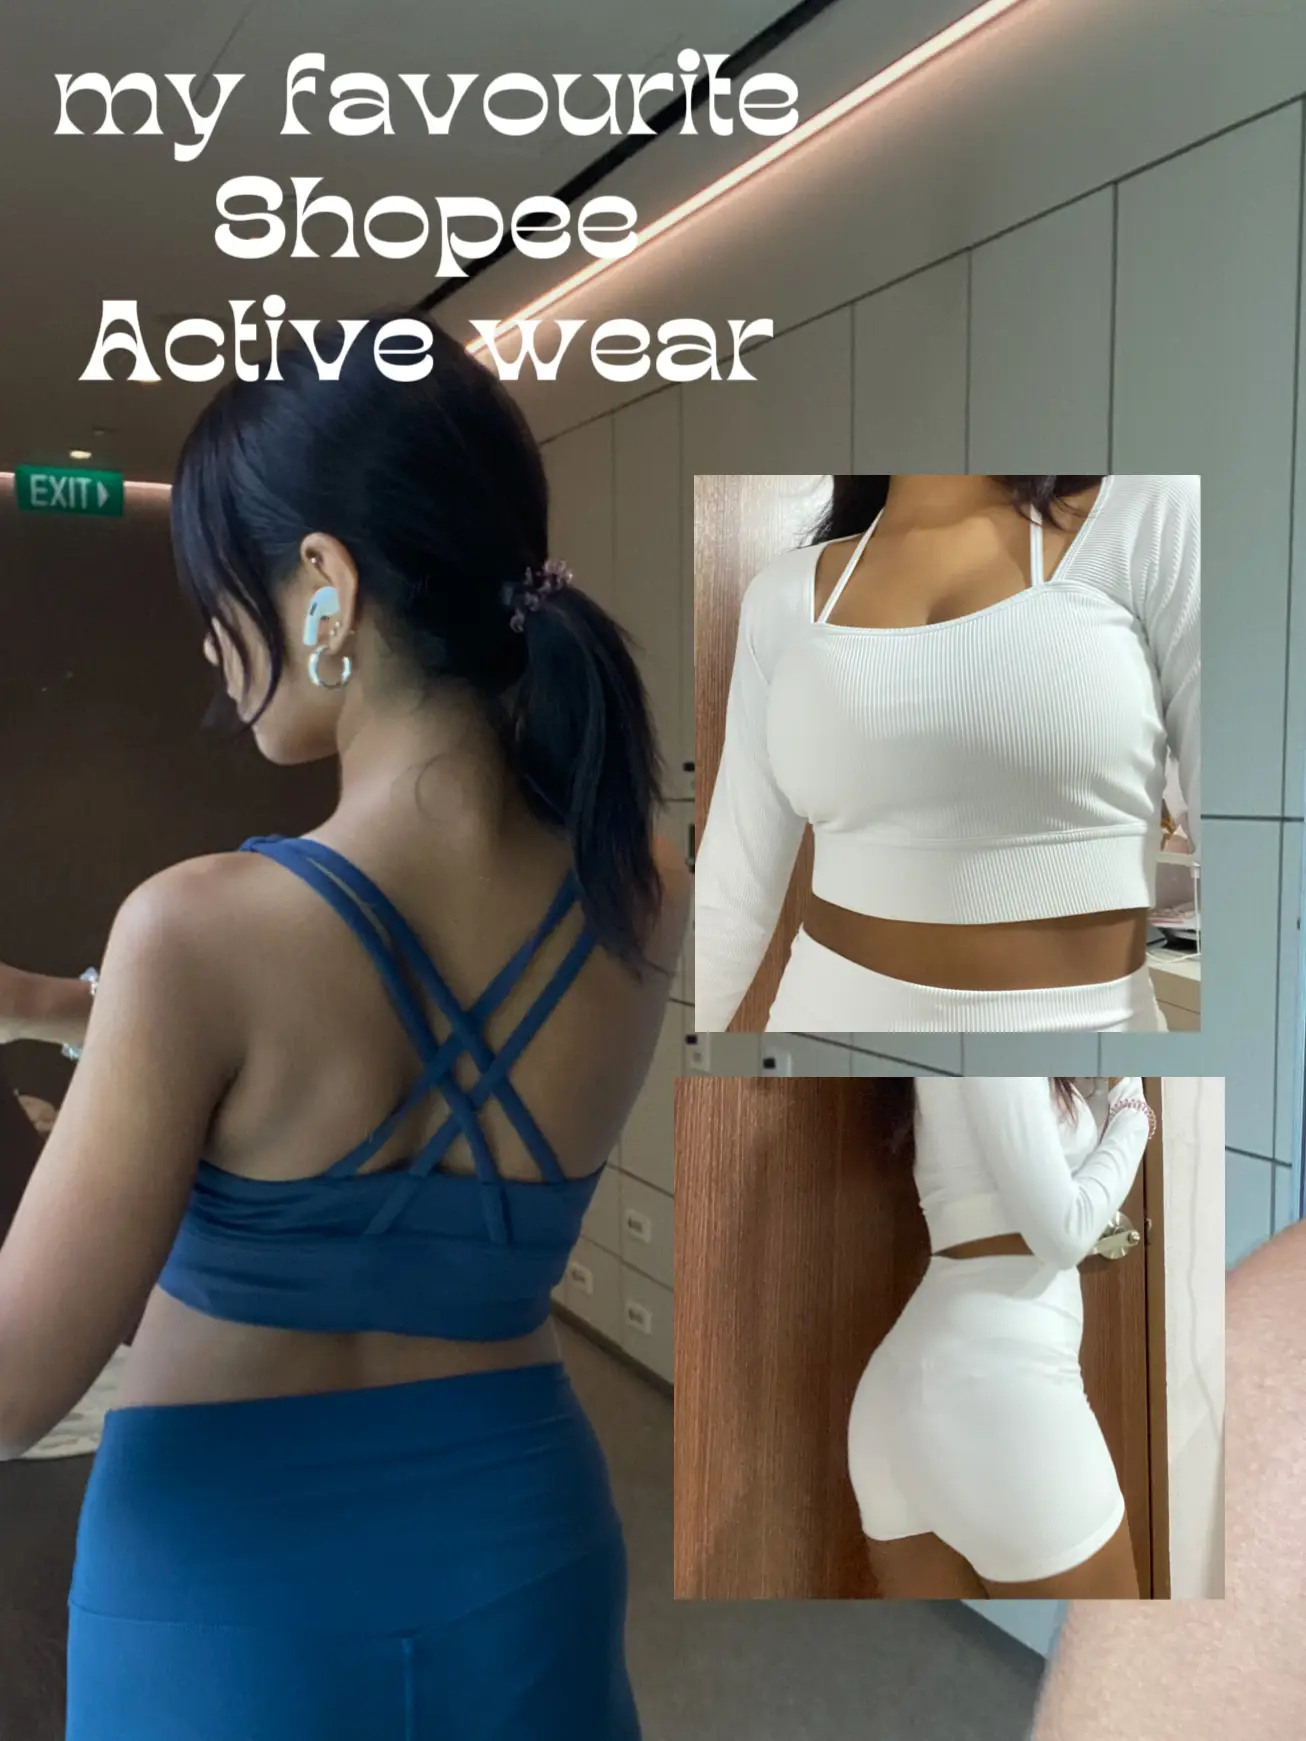 My favourite Shopee activewear!, Gallery posted by Isabelle Danker